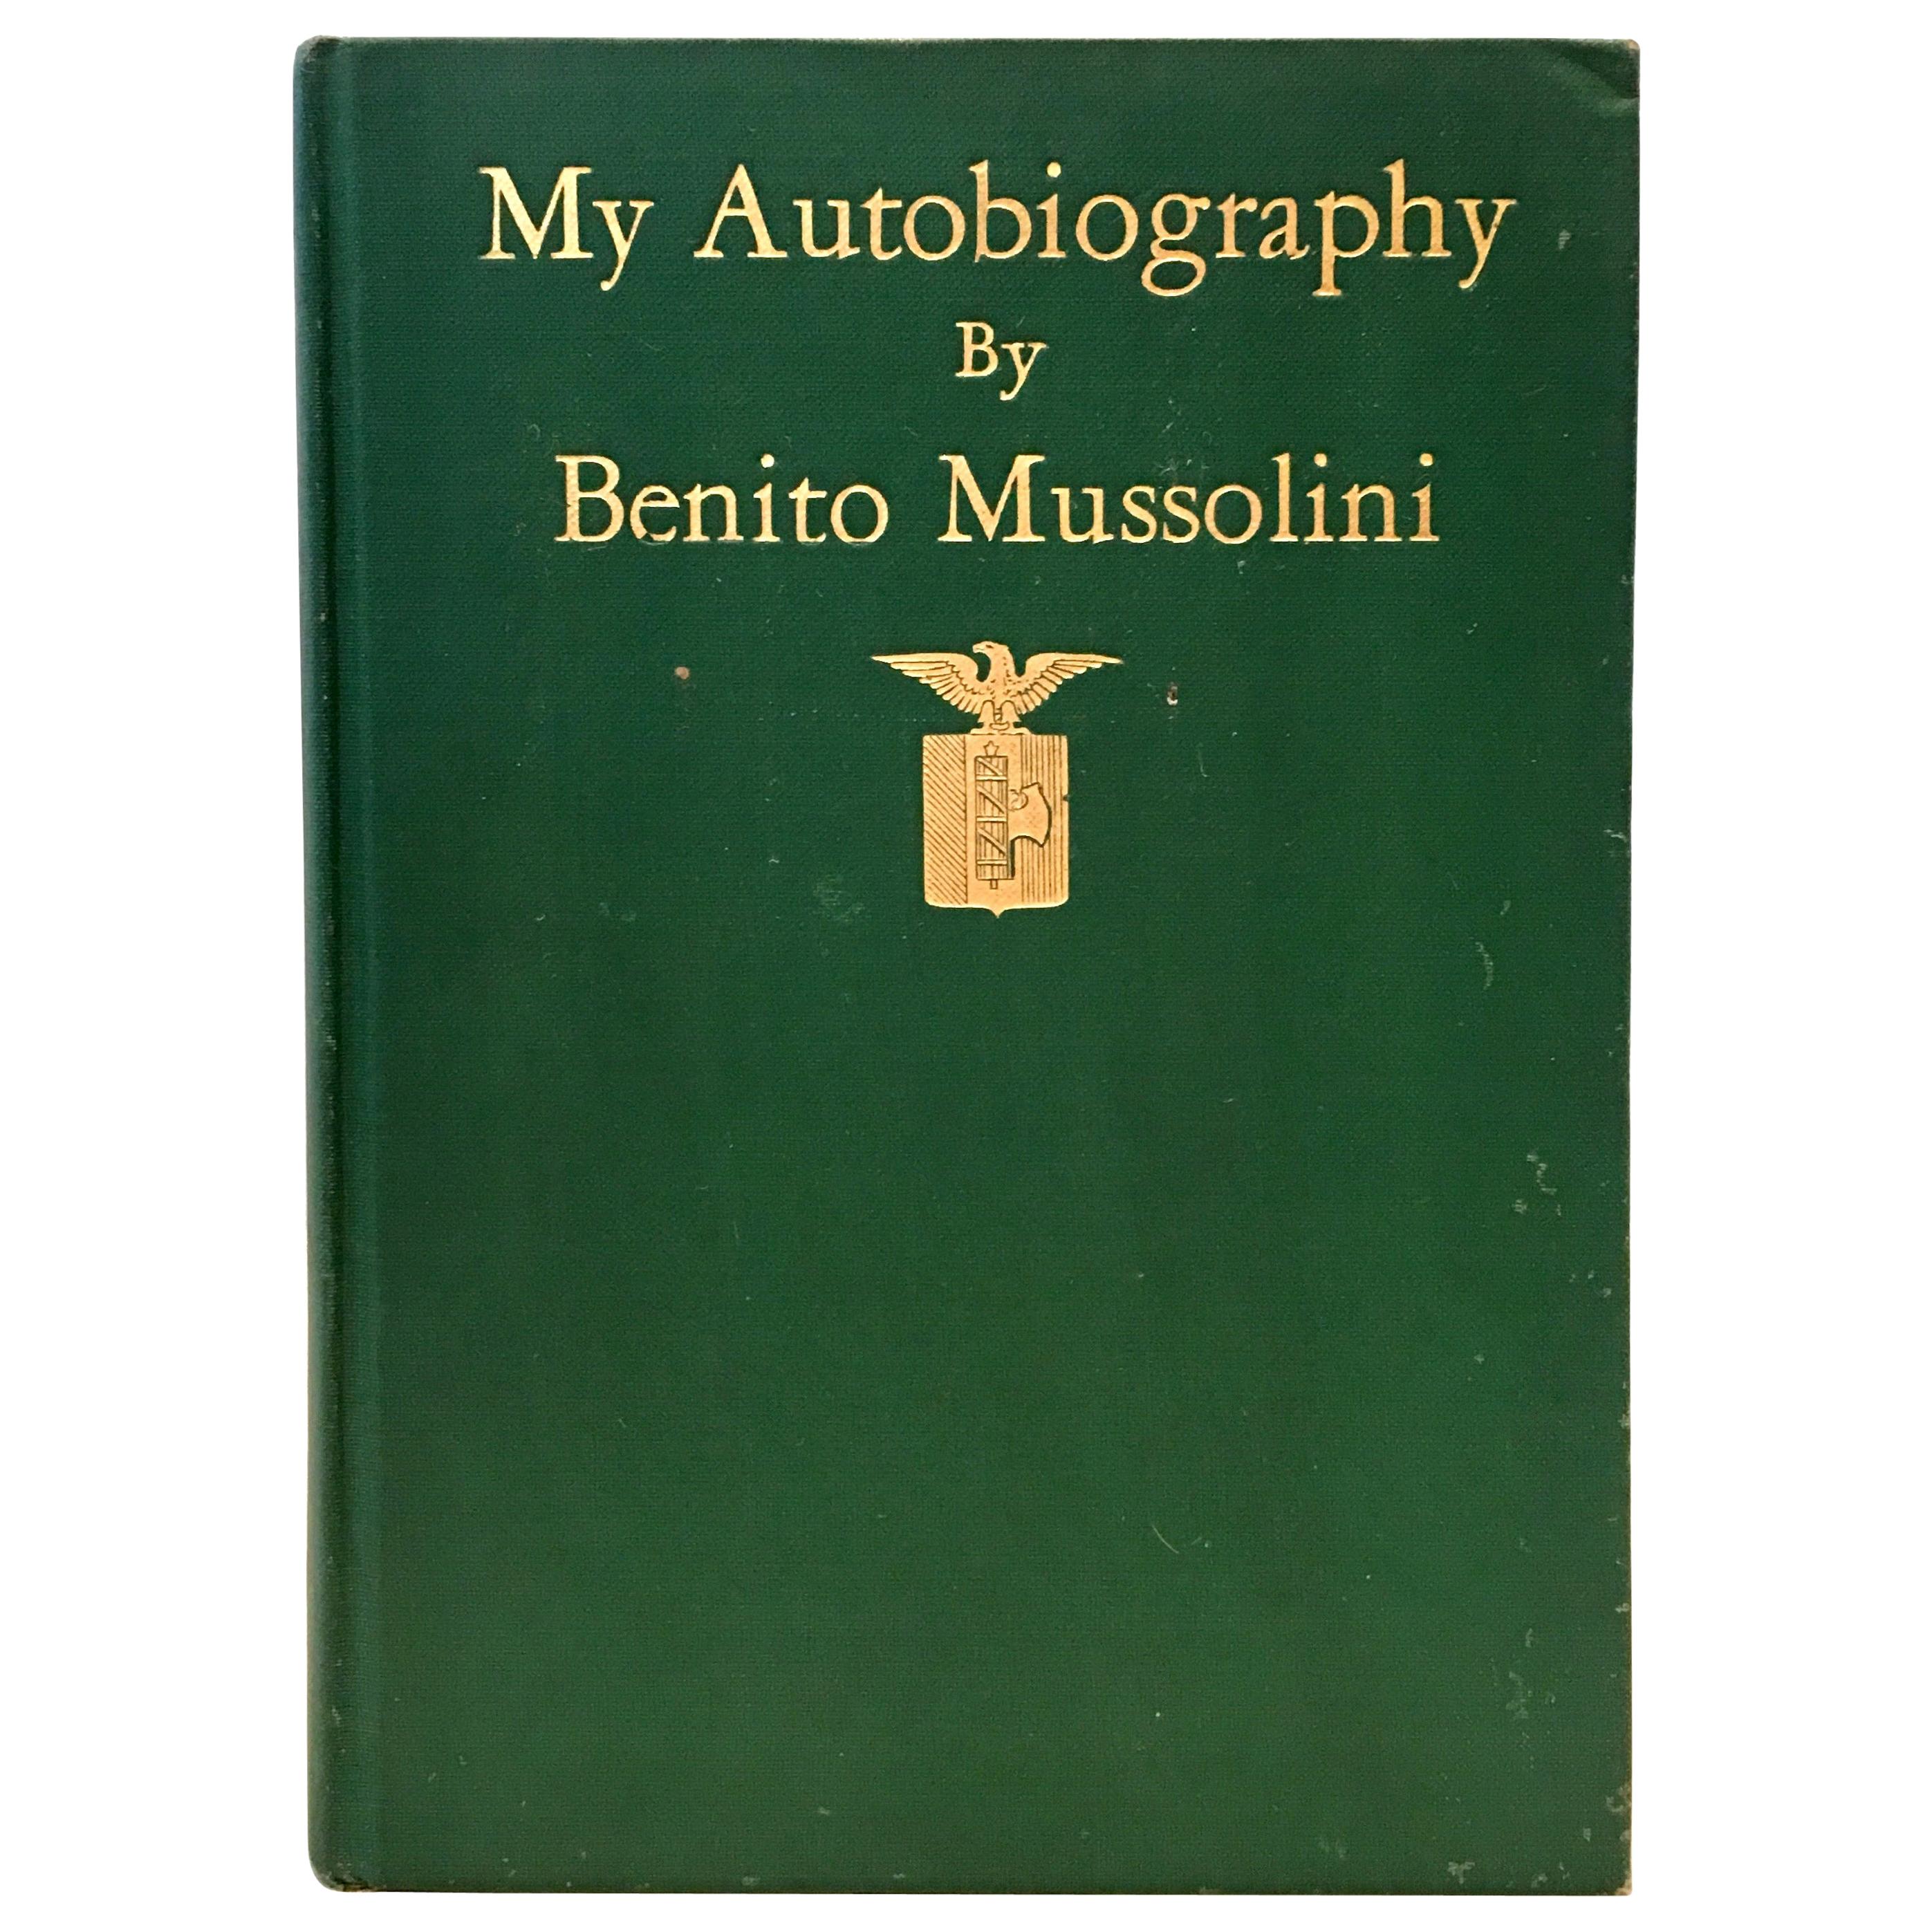 1928 1st Edition Book "My Autobiography" by, Benito Mussolini